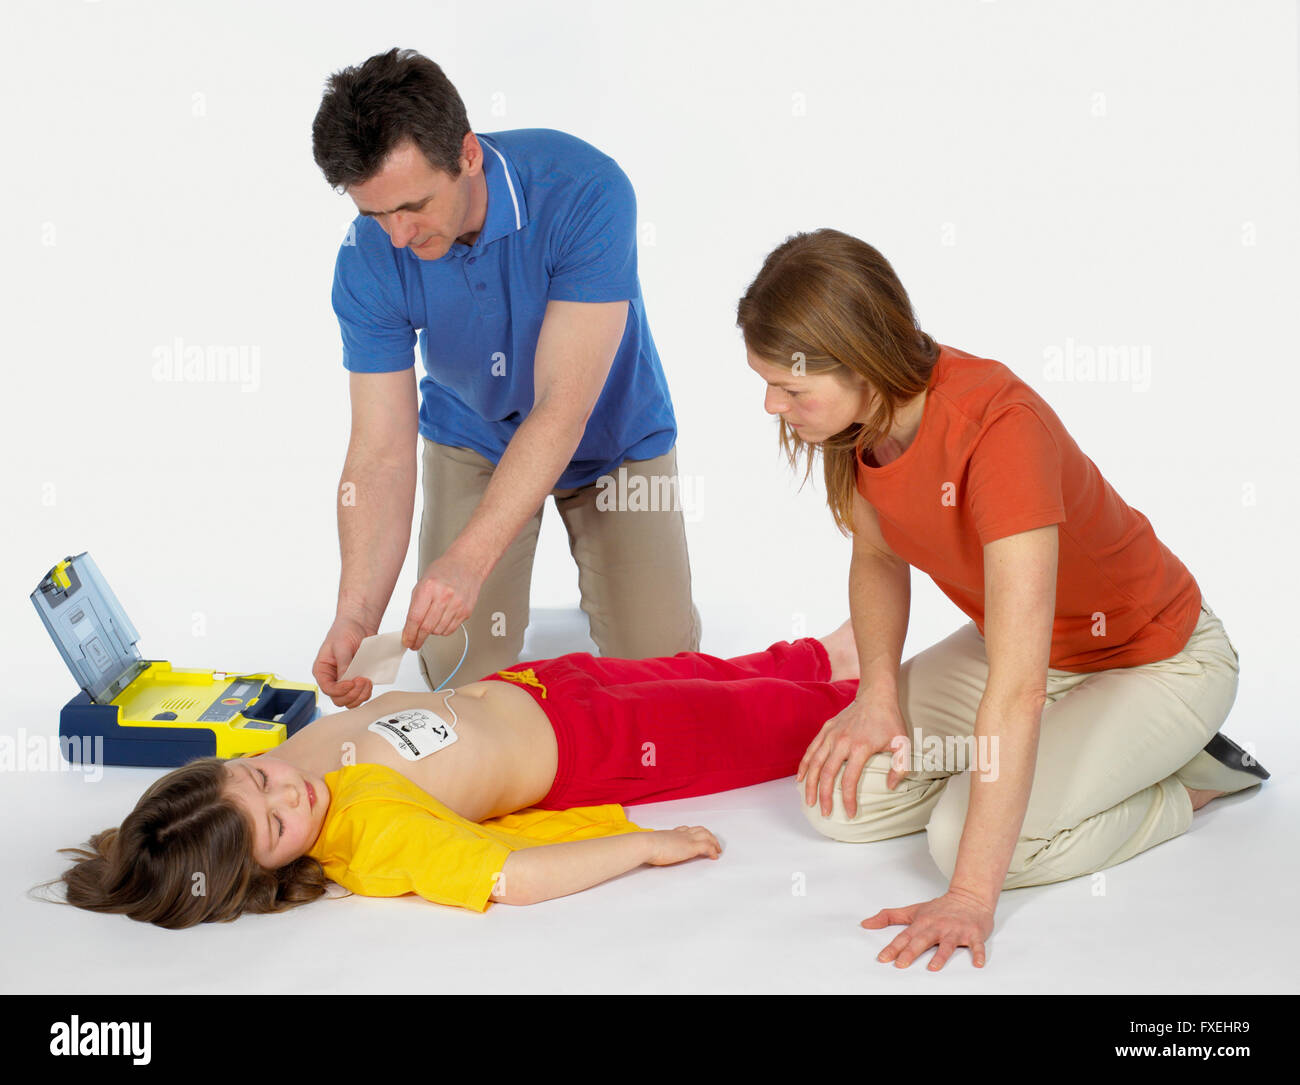 First aid, using paediatric defibrillator, elementary age girl lying on floor unconscious, mature man attaching defibrillator pads to girl's chest, mid adult woman watching Stock Photo